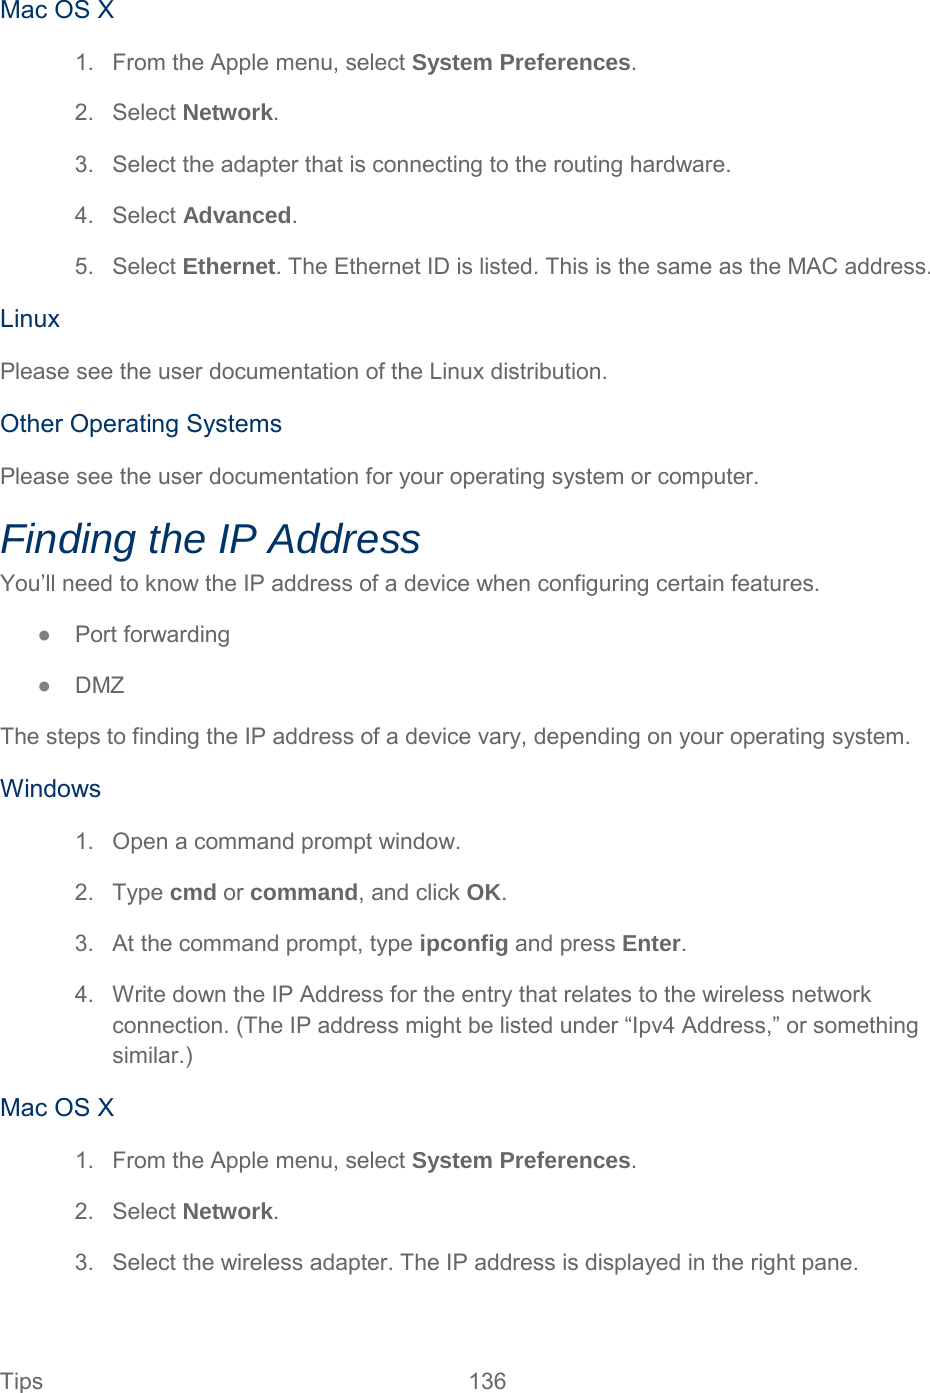 Mac OS X 1. From the Apple menu, select System Preferences. 2. Select Network. 3. Select the adapter that is connecting to the routing hardware. 4. Select Advanced. 5. Select Ethernet. The Ethernet ID is listed. This is the same as the MAC address. Linux Please see the user documentation of the Linux distribution. Other Operating Systems Please see the user documentation for your operating system or computer. Finding the IP Address You’ll need to know the IP address of a device when configuring certain features. ●  Port forwarding ●  DMZ The steps to finding the IP address of a device vary, depending on your operating system. Windows 1. Open a command prompt window. 2. Type cmd or command, and click OK. 3. At the command prompt, type ipconfig and press Enter. 4. Write down the IP Address for the entry that relates to the wireless network connection. (The IP address might be listed under “Ipv4 Address,” or something similar.) Mac OS X 1. From the Apple menu, select System Preferences. 2. Select Network. 3. Select the wireless adapter. The IP address is displayed in the right pane. Tips 136   